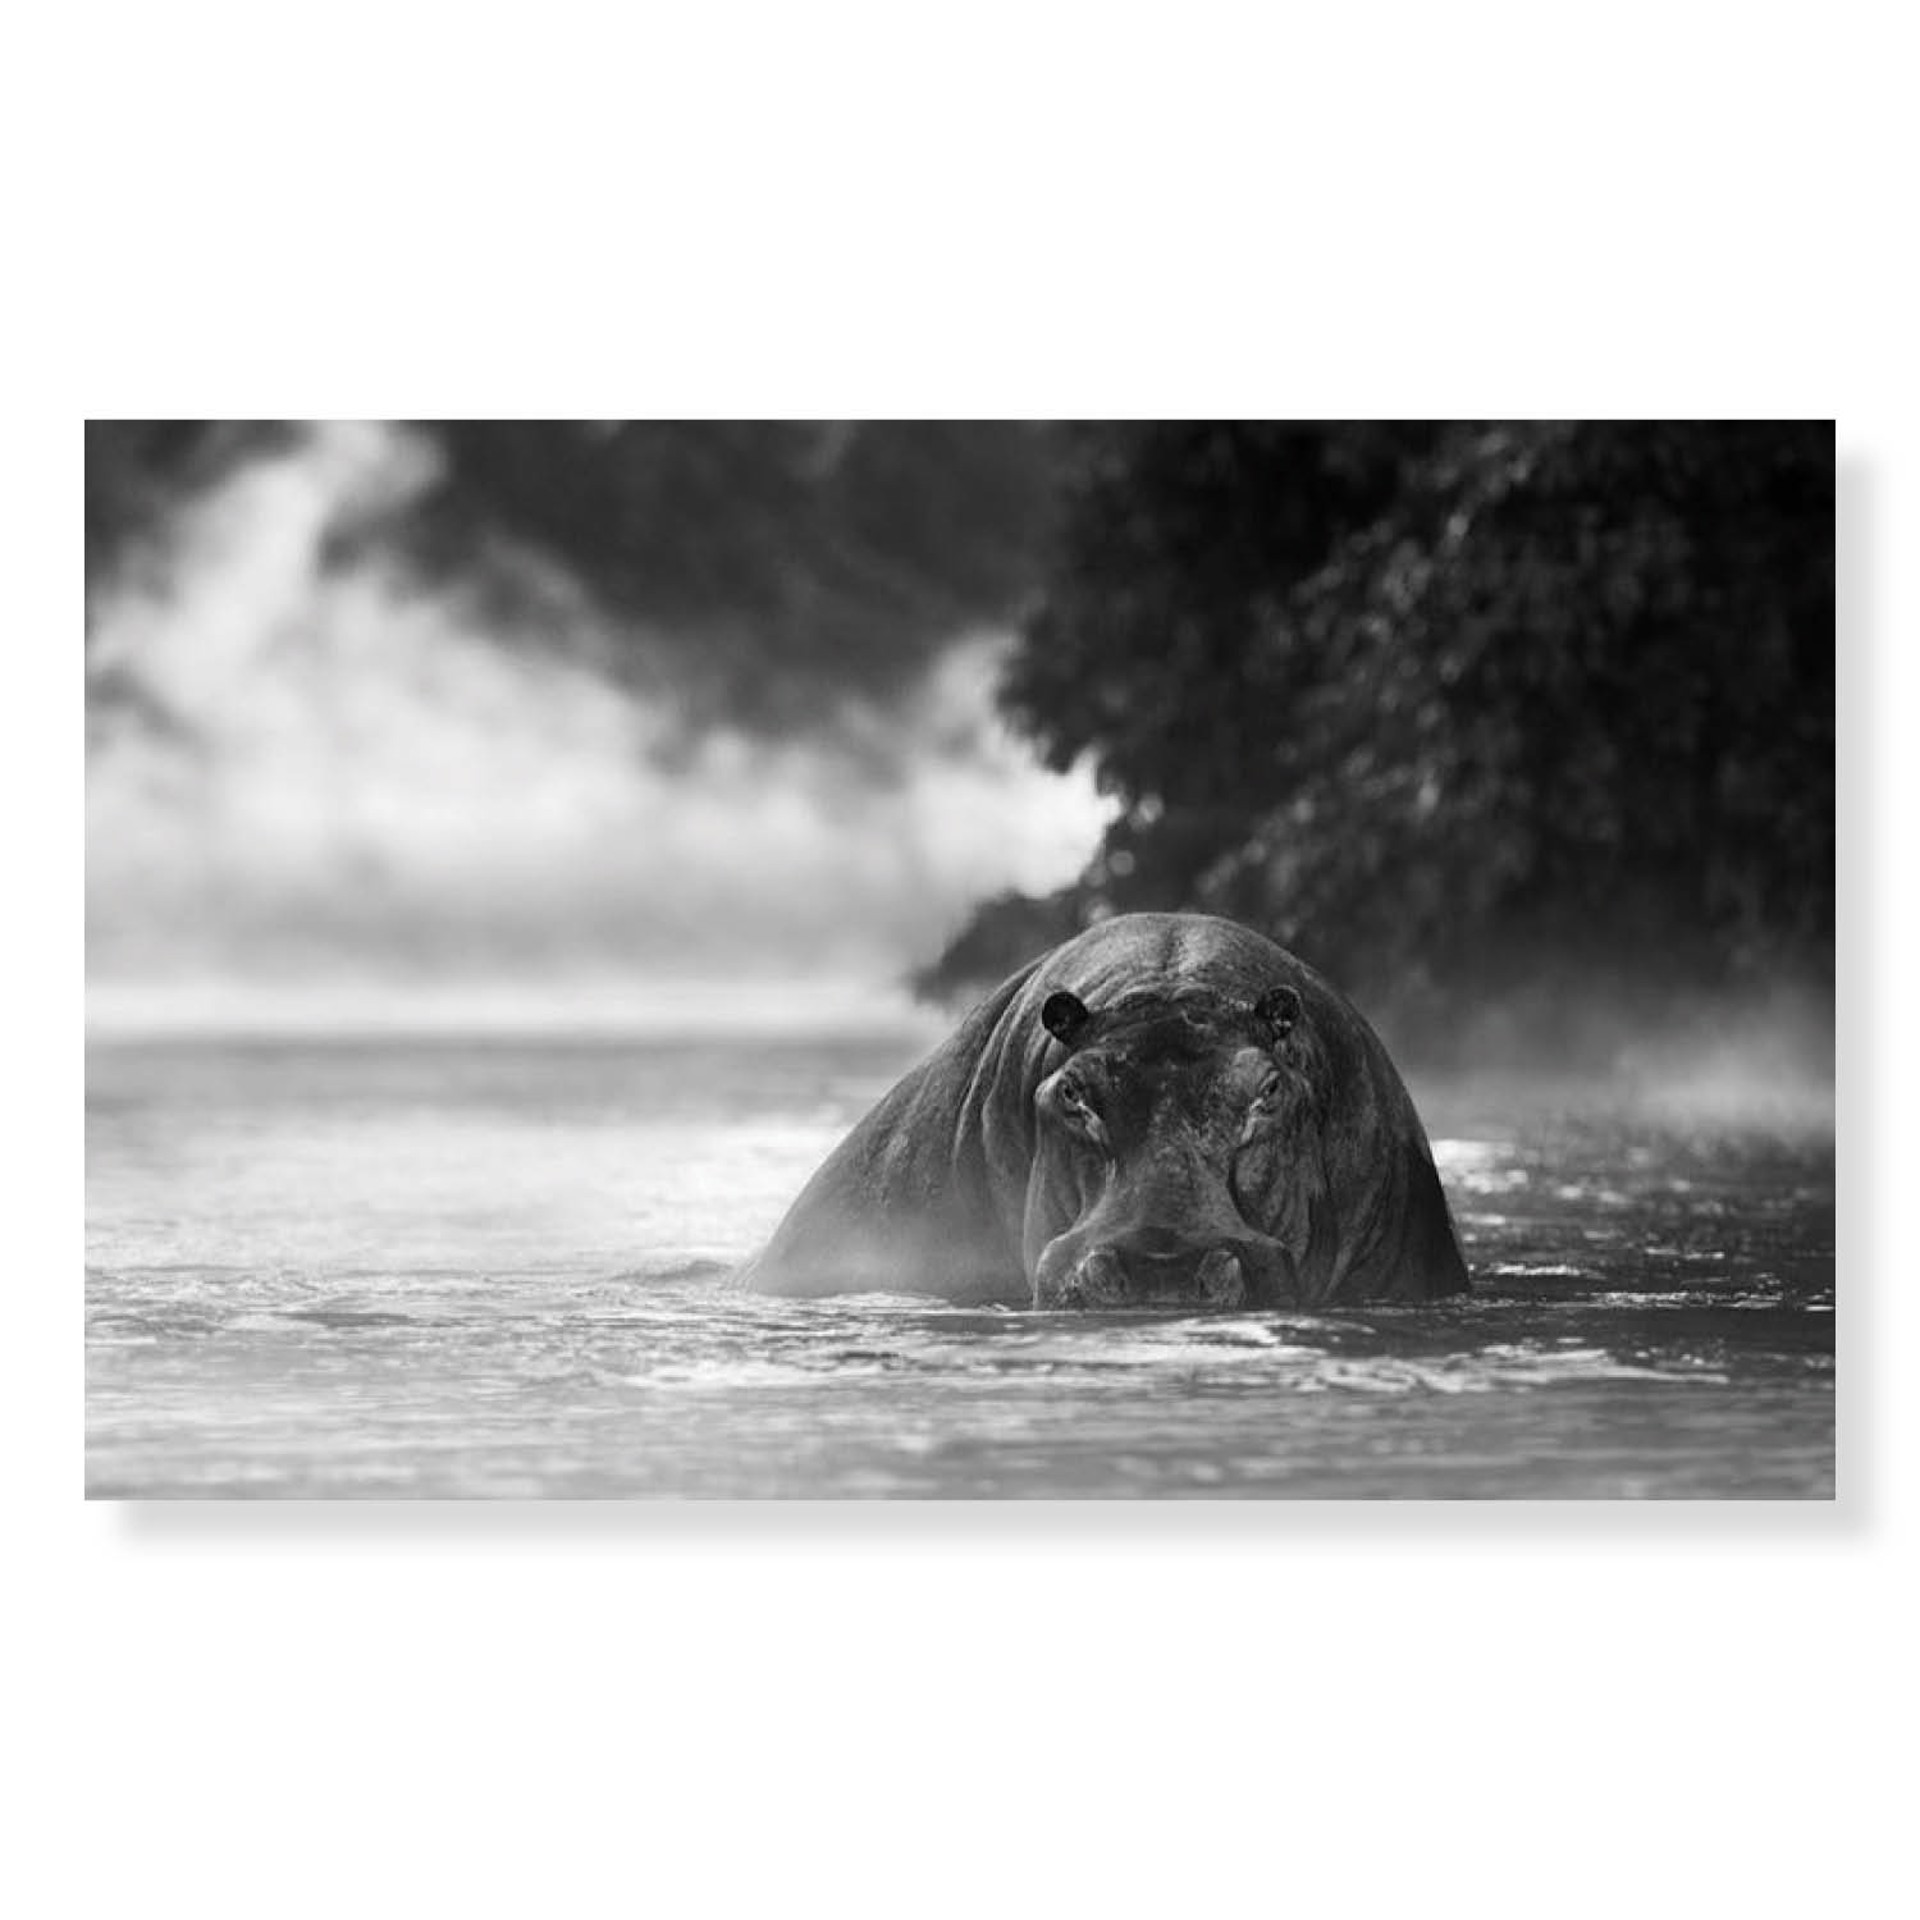 The River Monster by David Yarrow